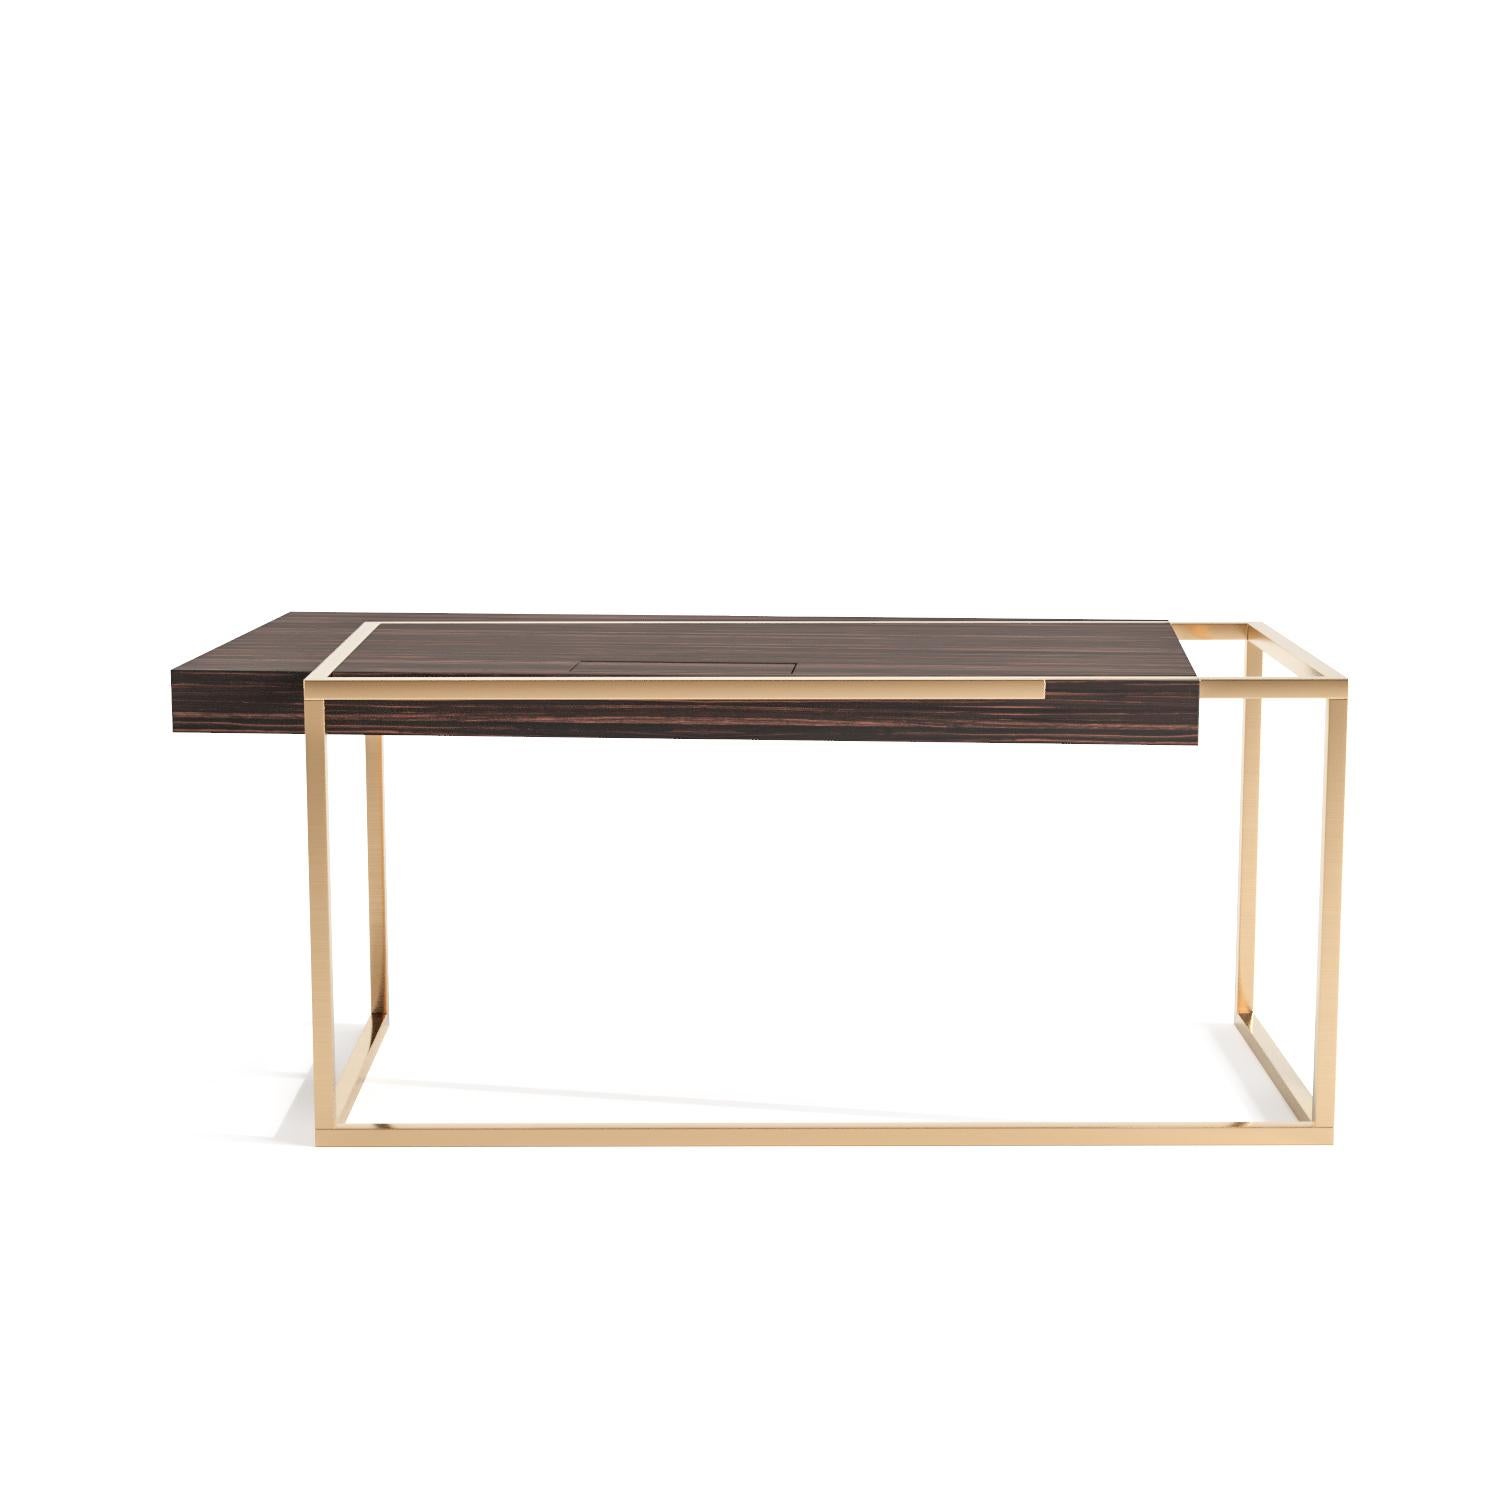 The Executive Desk ExCentric 2.0 listed here is made in ebony macassar wood and brushed brass. However, we can produce this in customized options: 
Structure: Stainless steel (polished or brushed); brass (polished or brushed).
Tabletop: Another